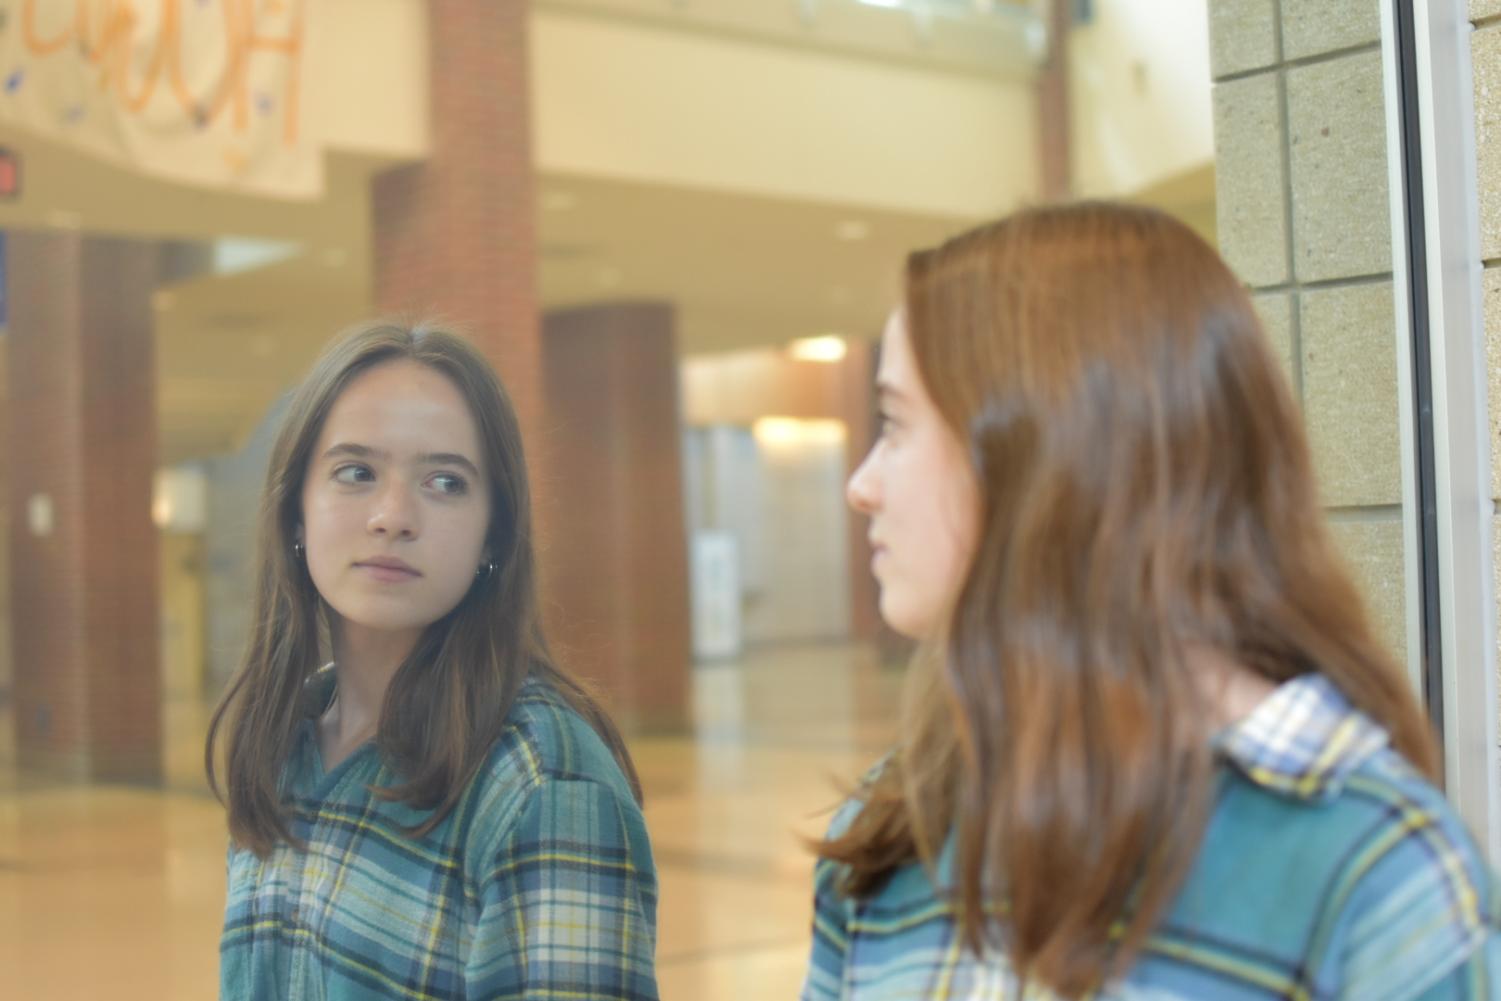 Sophomore Becca Howard reflects on the effects of self-improvement on personal identity.